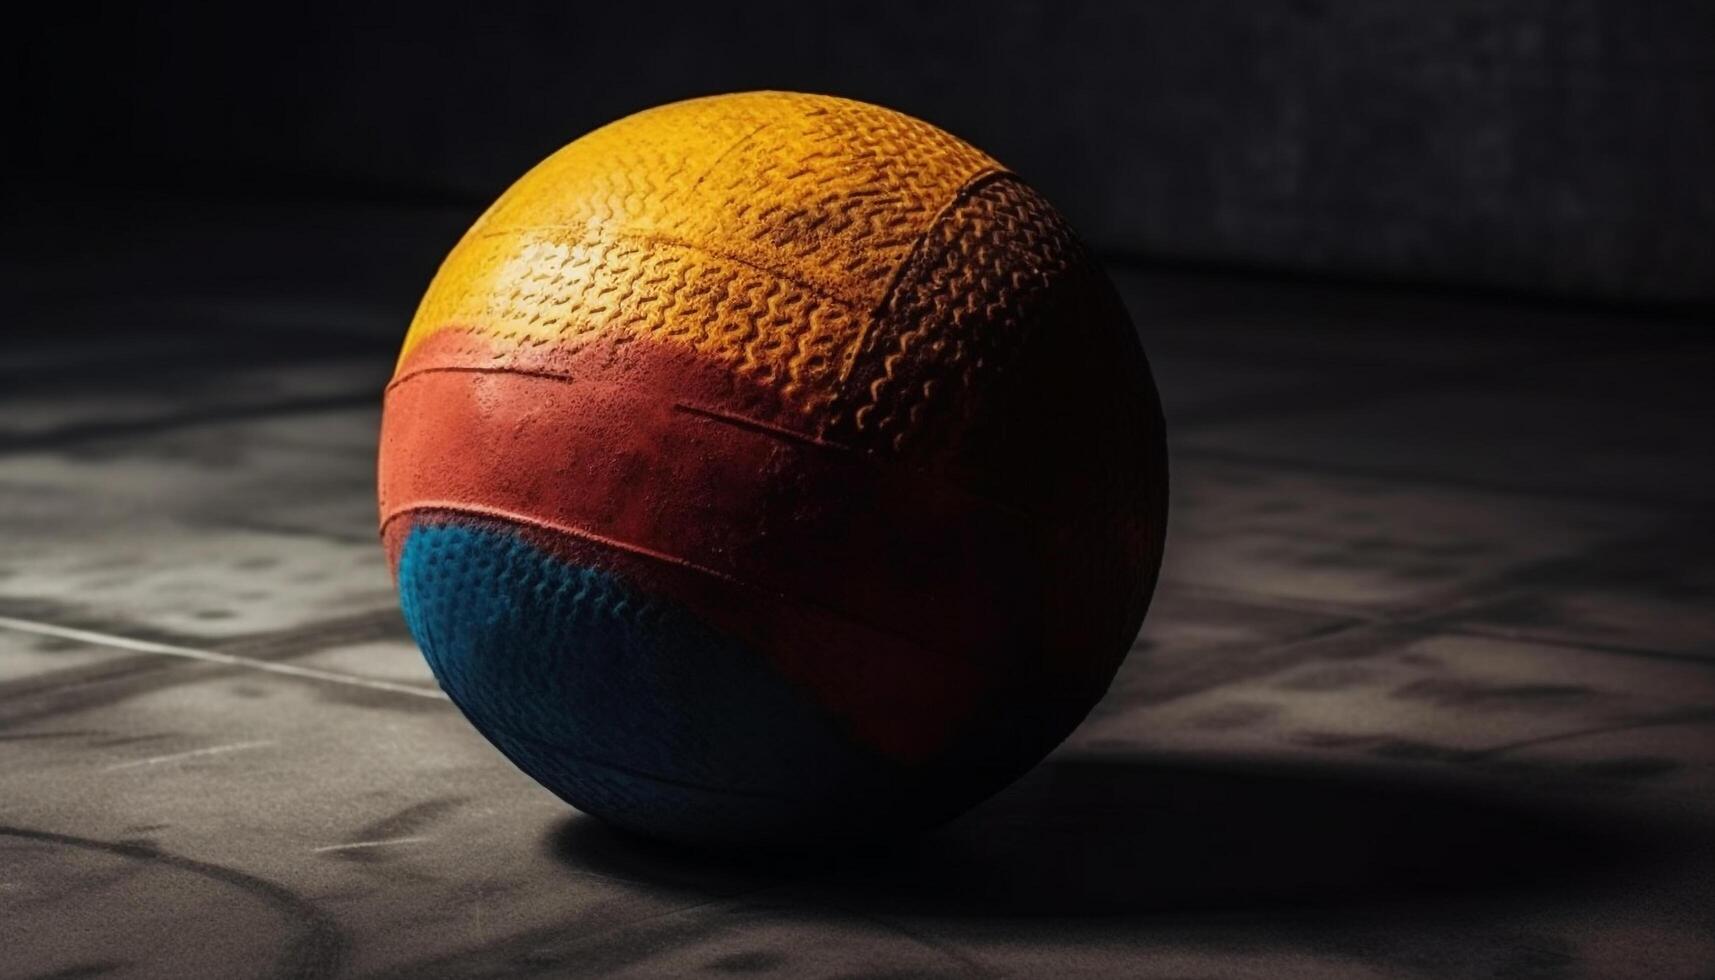 Leather sphere beats basketball, success in competition generated by AI photo